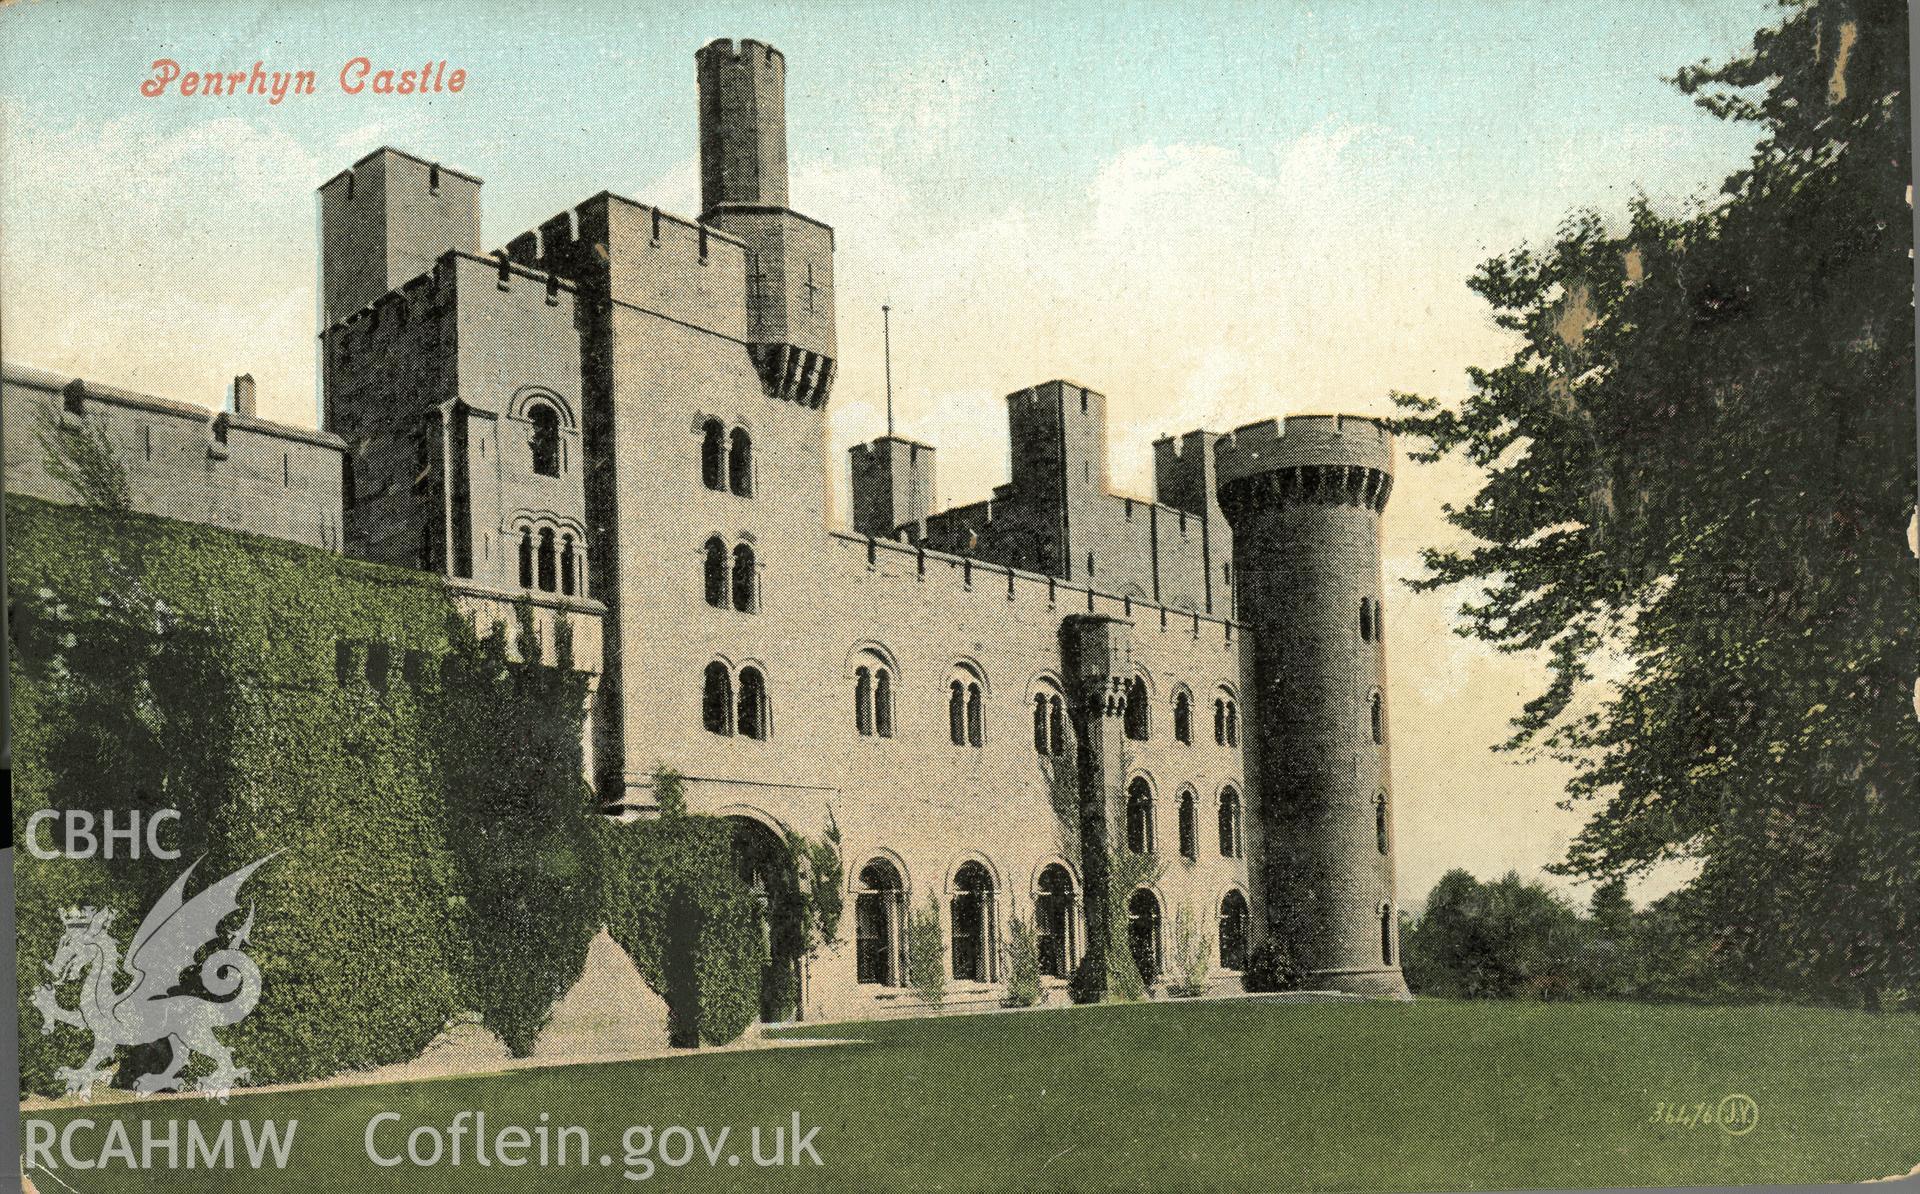 Digitised postcard image of Penrhyn Castle, Bangor, Valentine and Sons Ltd. Produced by Parks and Gardens Data Services, from an original item in the Peter Davis Collection at Parks and Gardens UK. We hold only web-resolution images of this collection, suitable for viewing on screen and for research purposes only. We do not hold the original images, or publication quality scans.